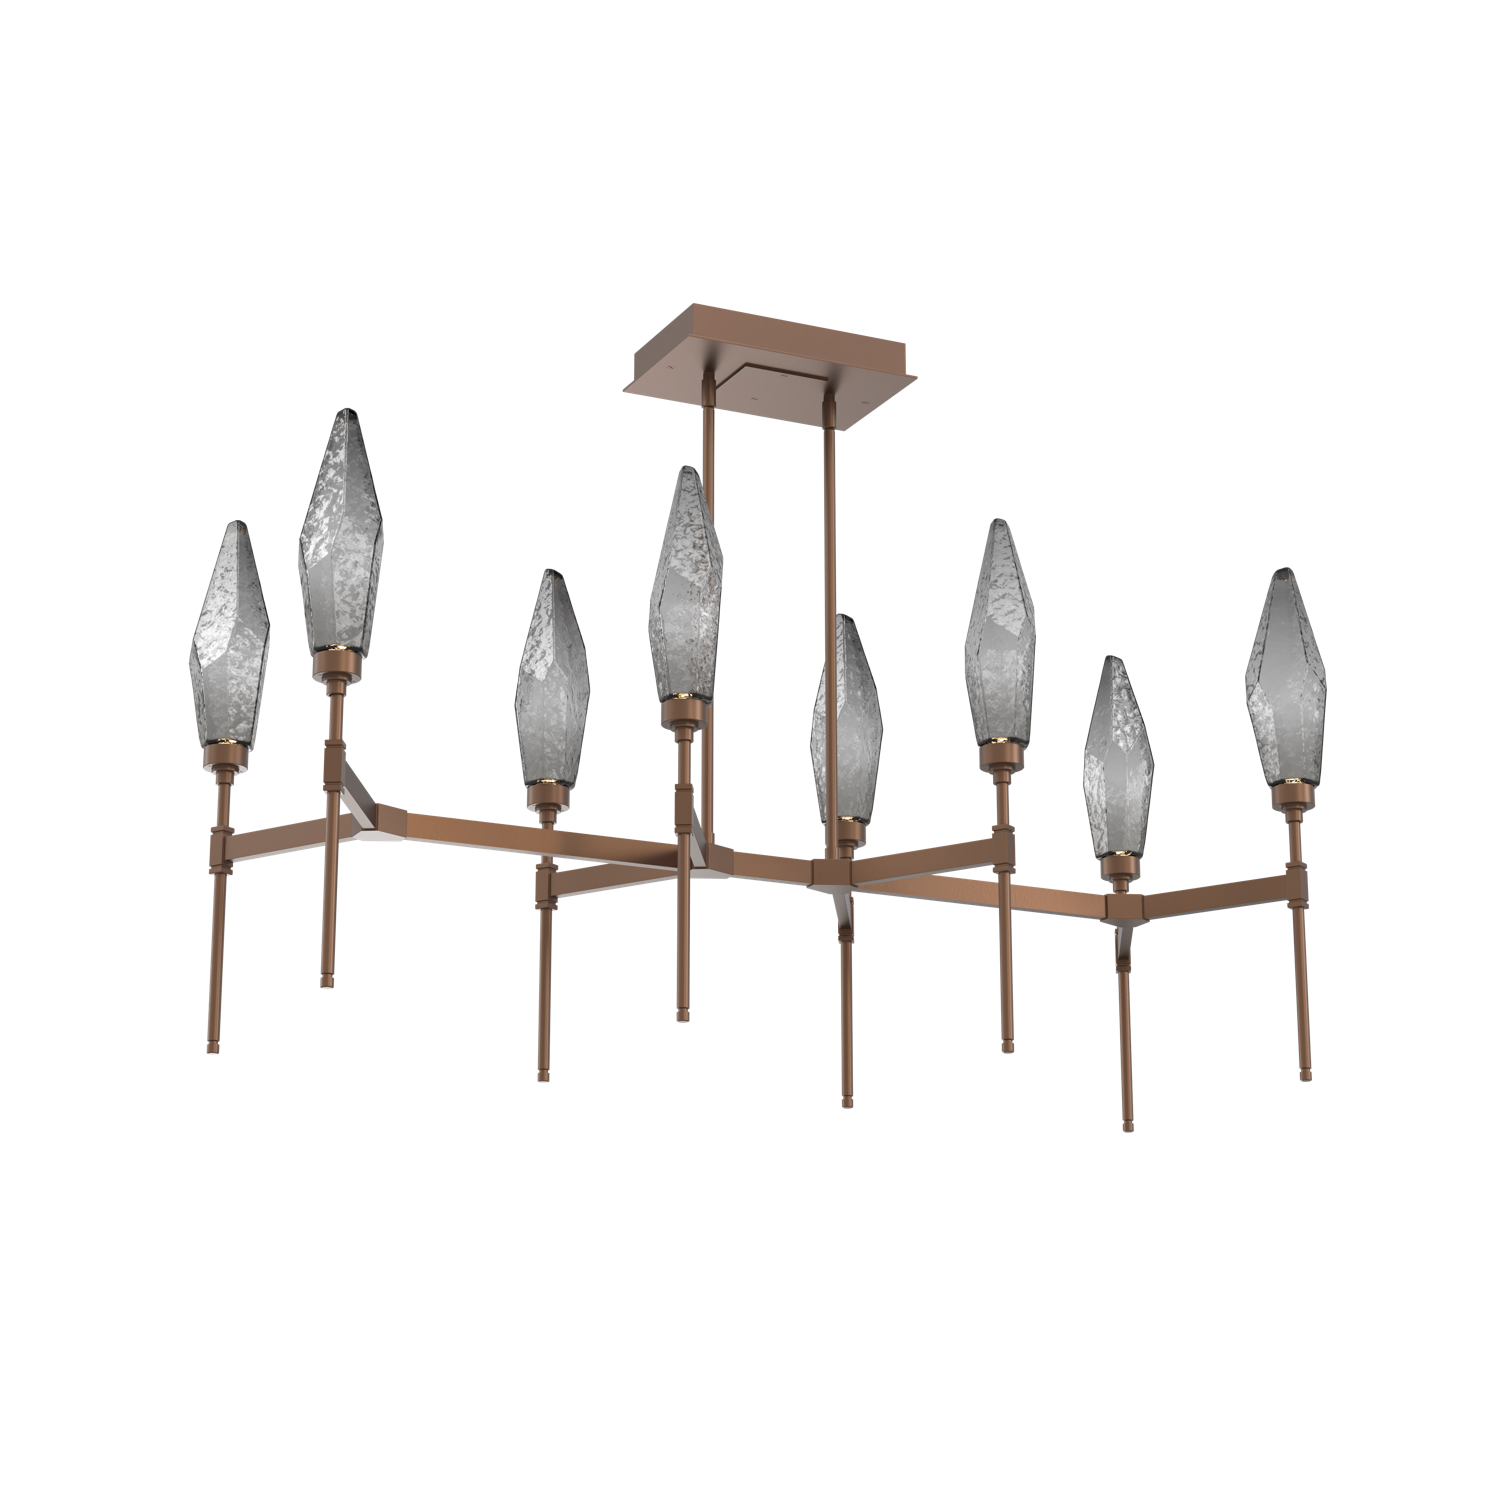 PLB0050-48-BB-CS-Hammerton-Studio-Rock-Crystal-48-inch-linear-belvedere-chandelier-with-burnished-bronze-finish-and-chilled-smoke-glass-shades-and-LED-lamping